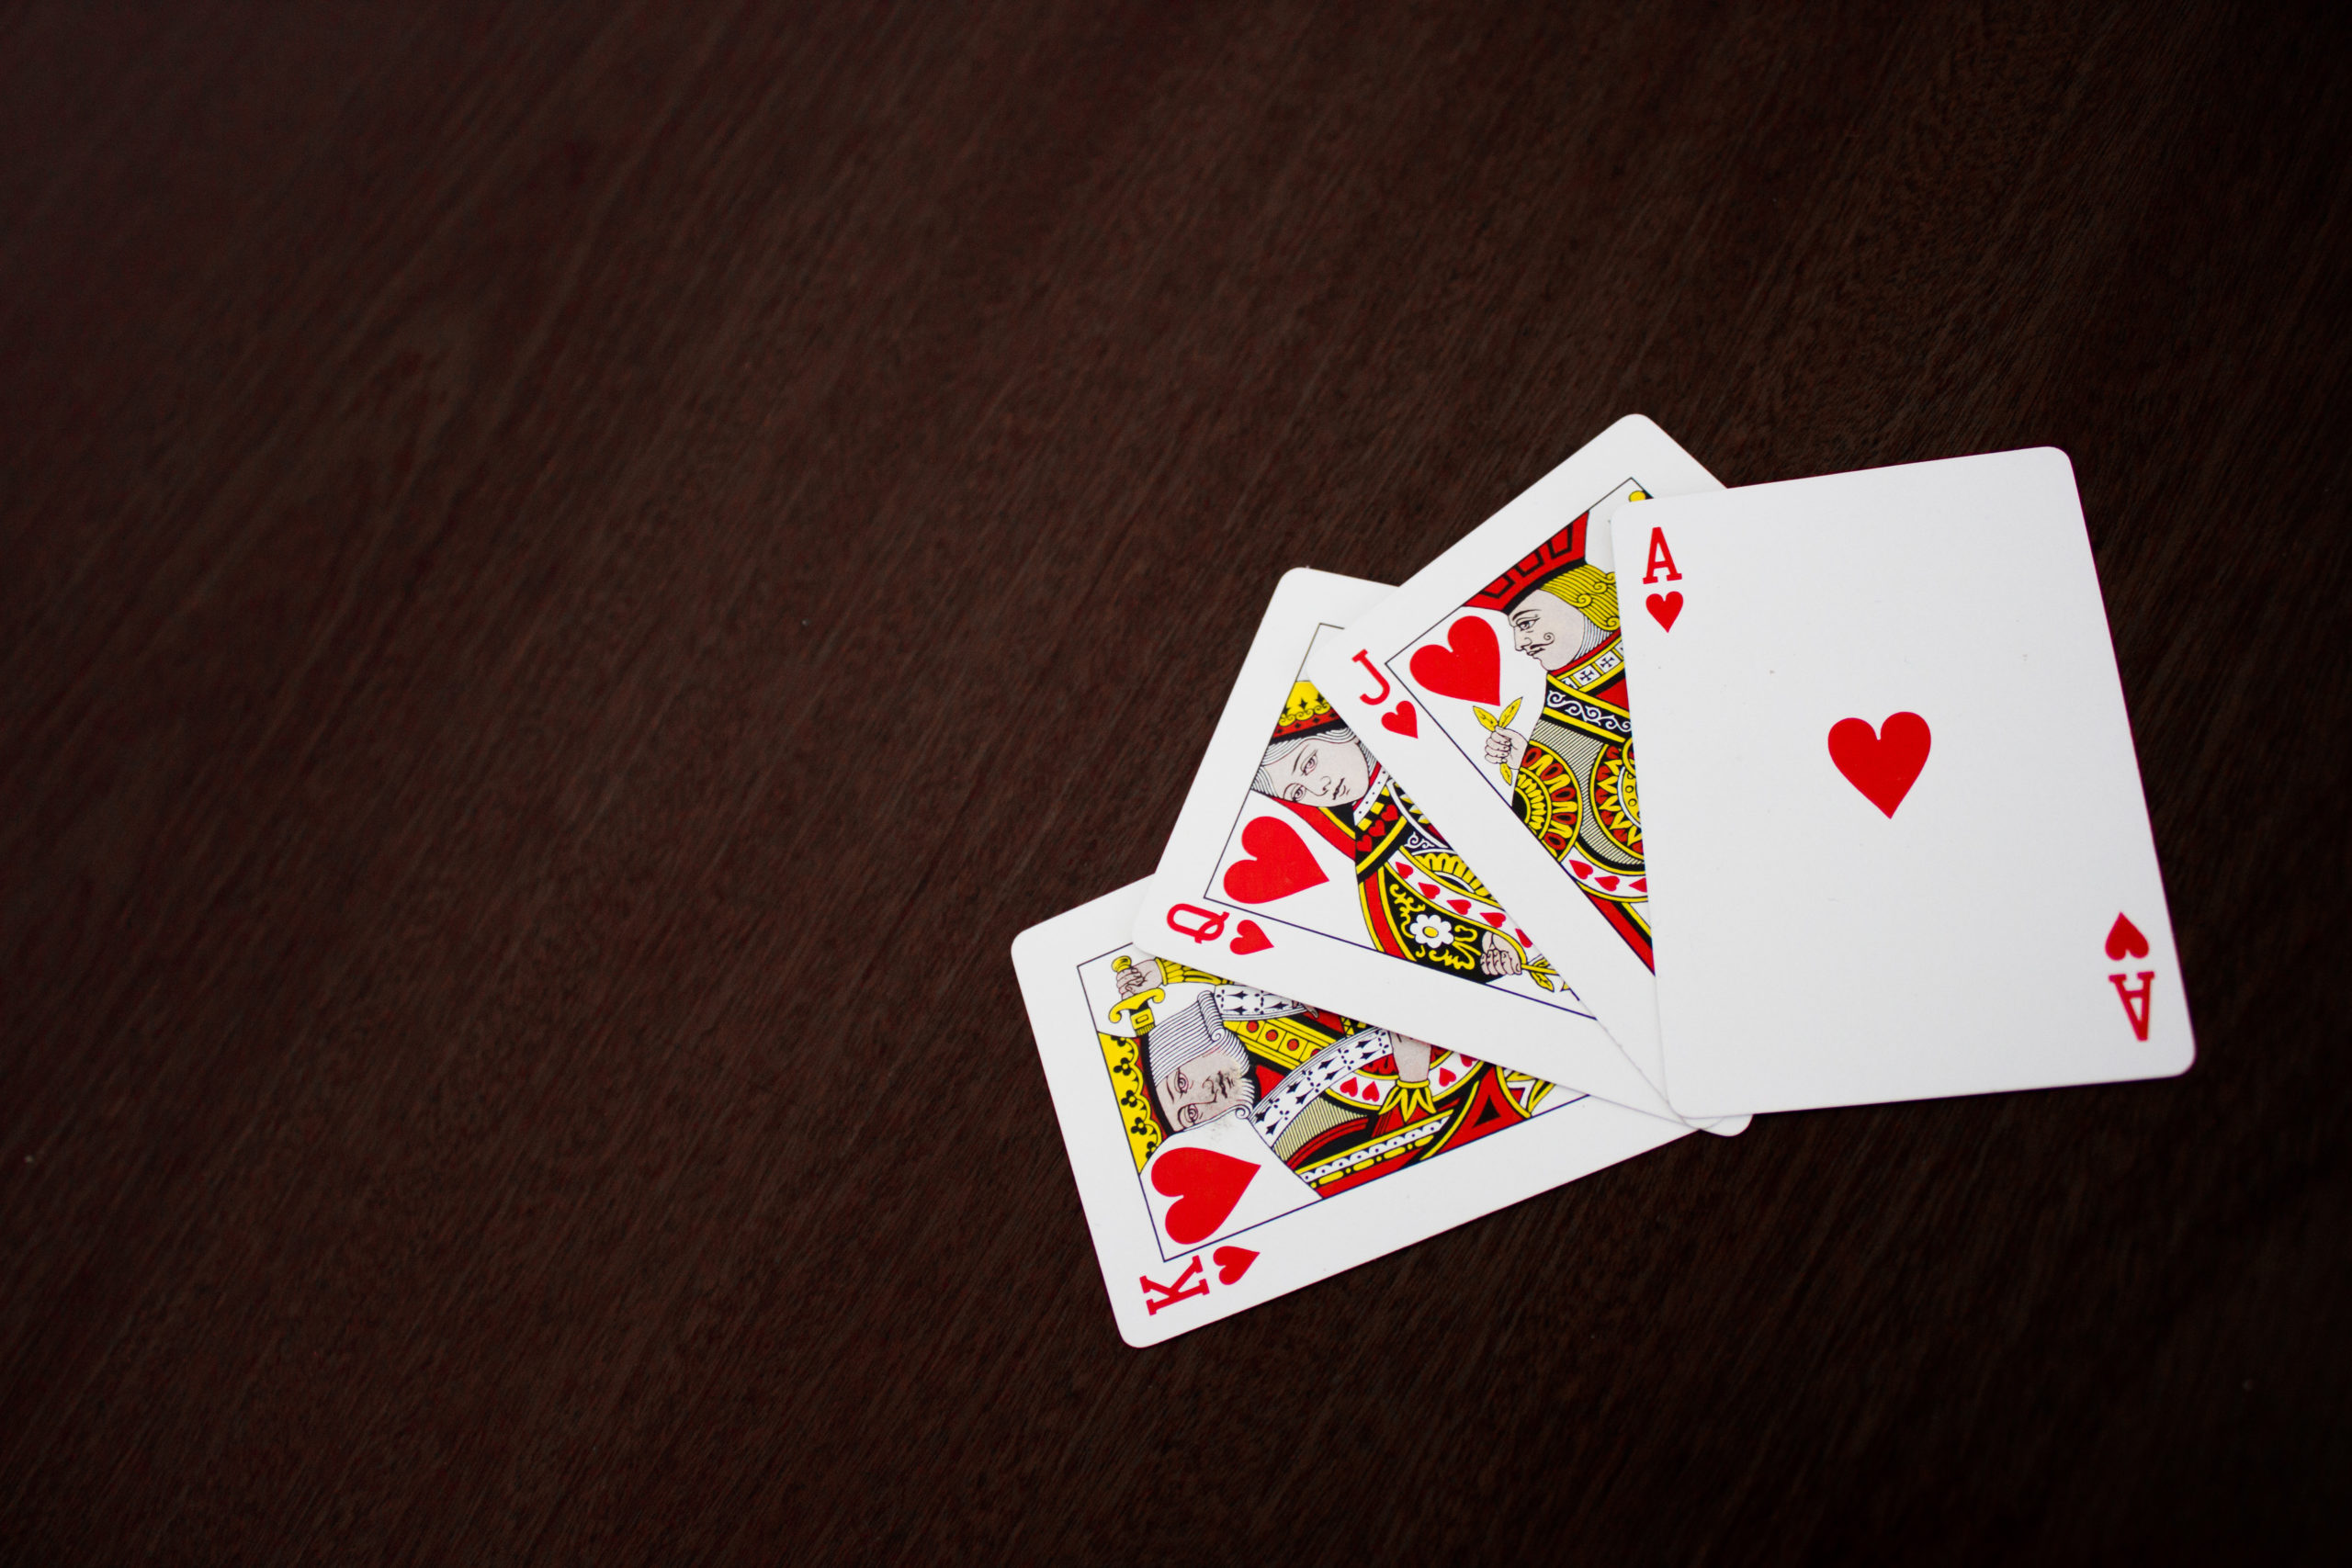 playing cards for casino table games